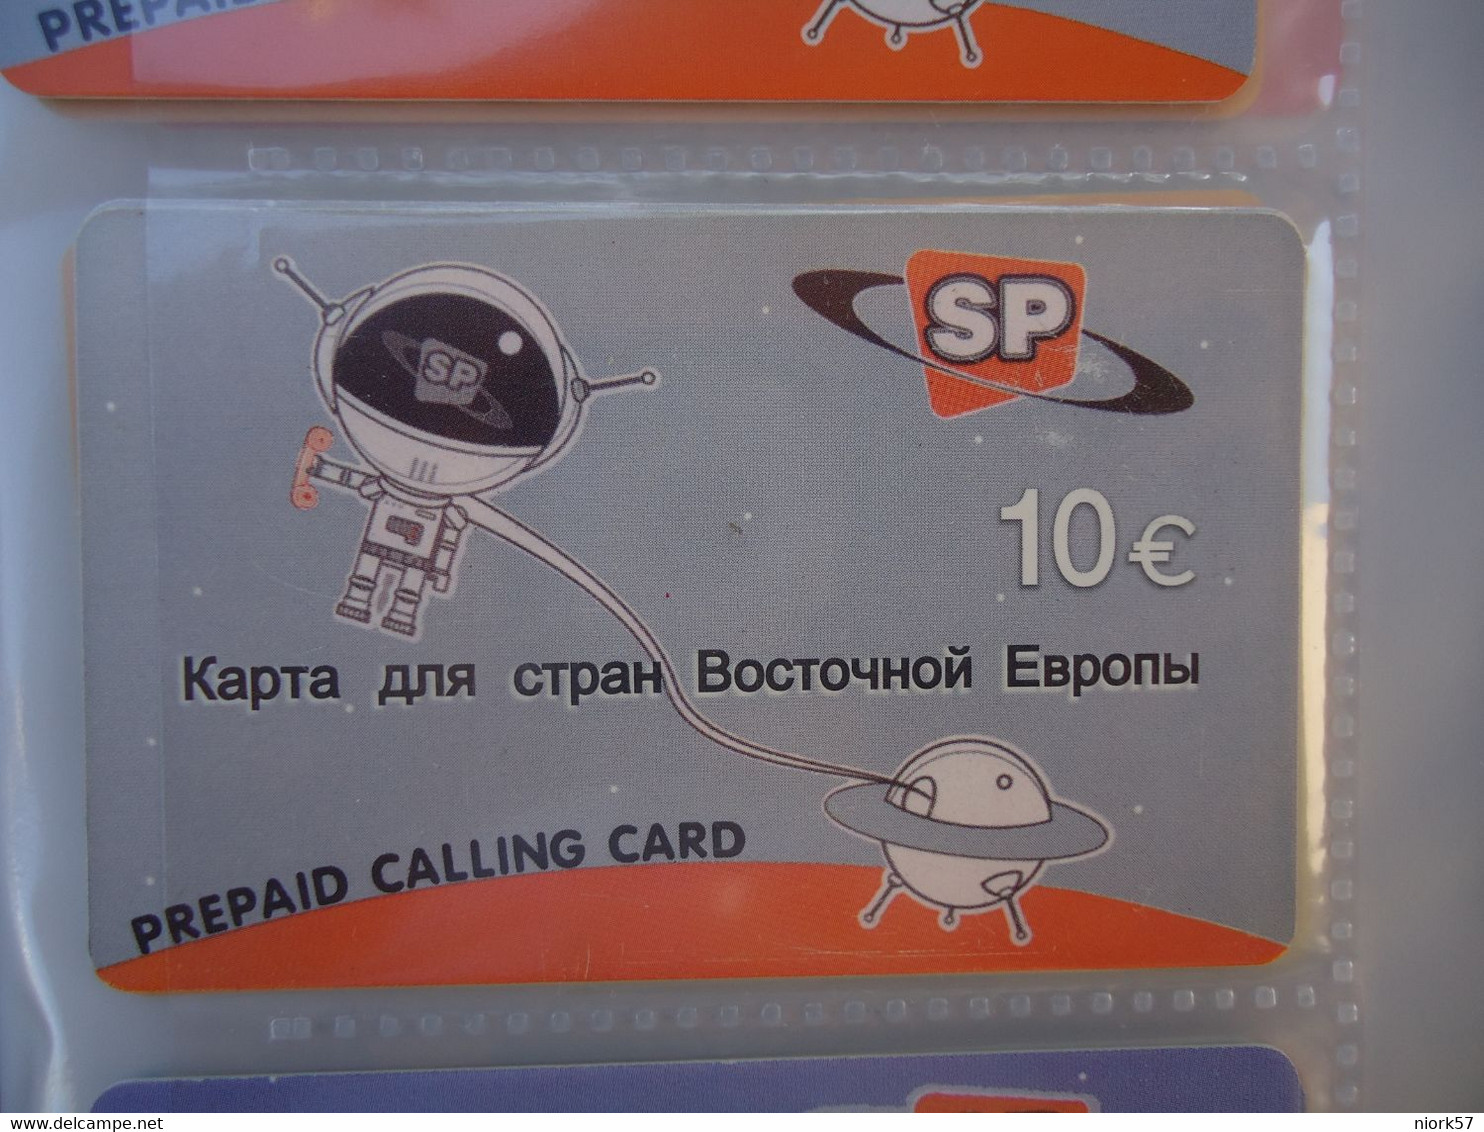 GREECE USED OLD  PREPAID  CARDS SP SPACE RUSSIA FROM MY COLLECTION - Raumfahrt